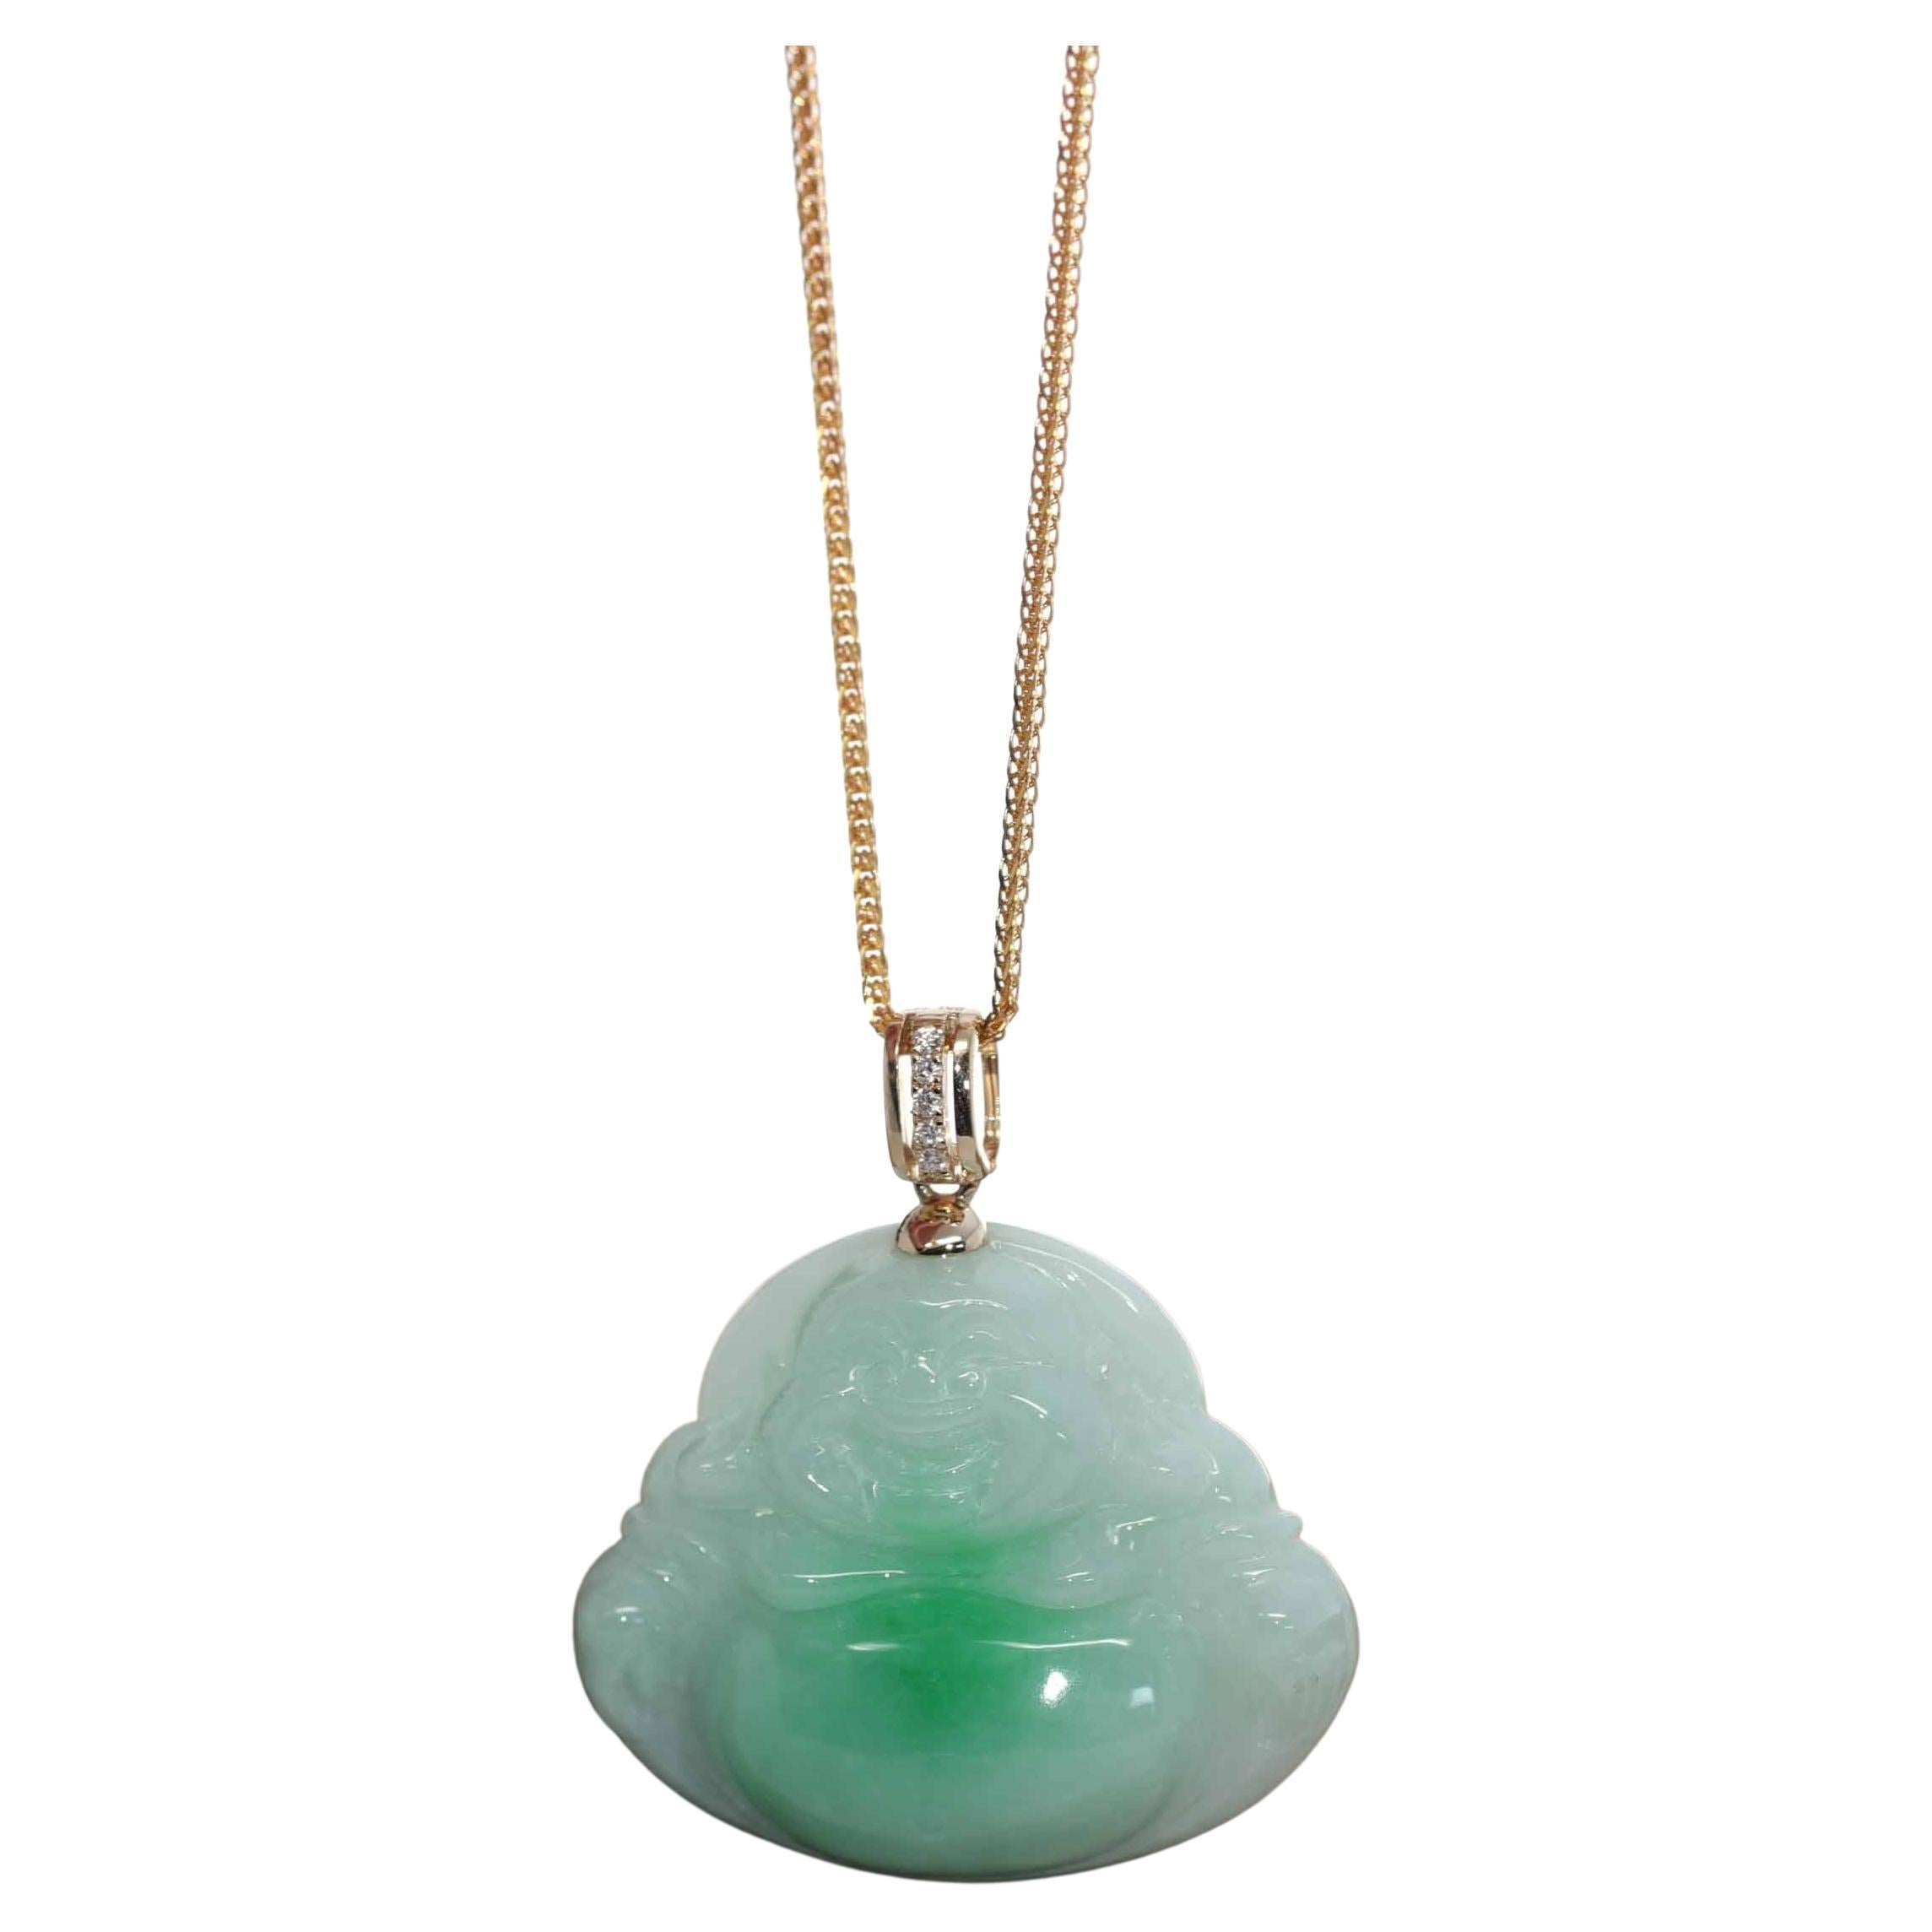 "Laughing Buddha" Green Jadeite Jade Necklace with 14k Yellow Gold Diamond Bail For Sale